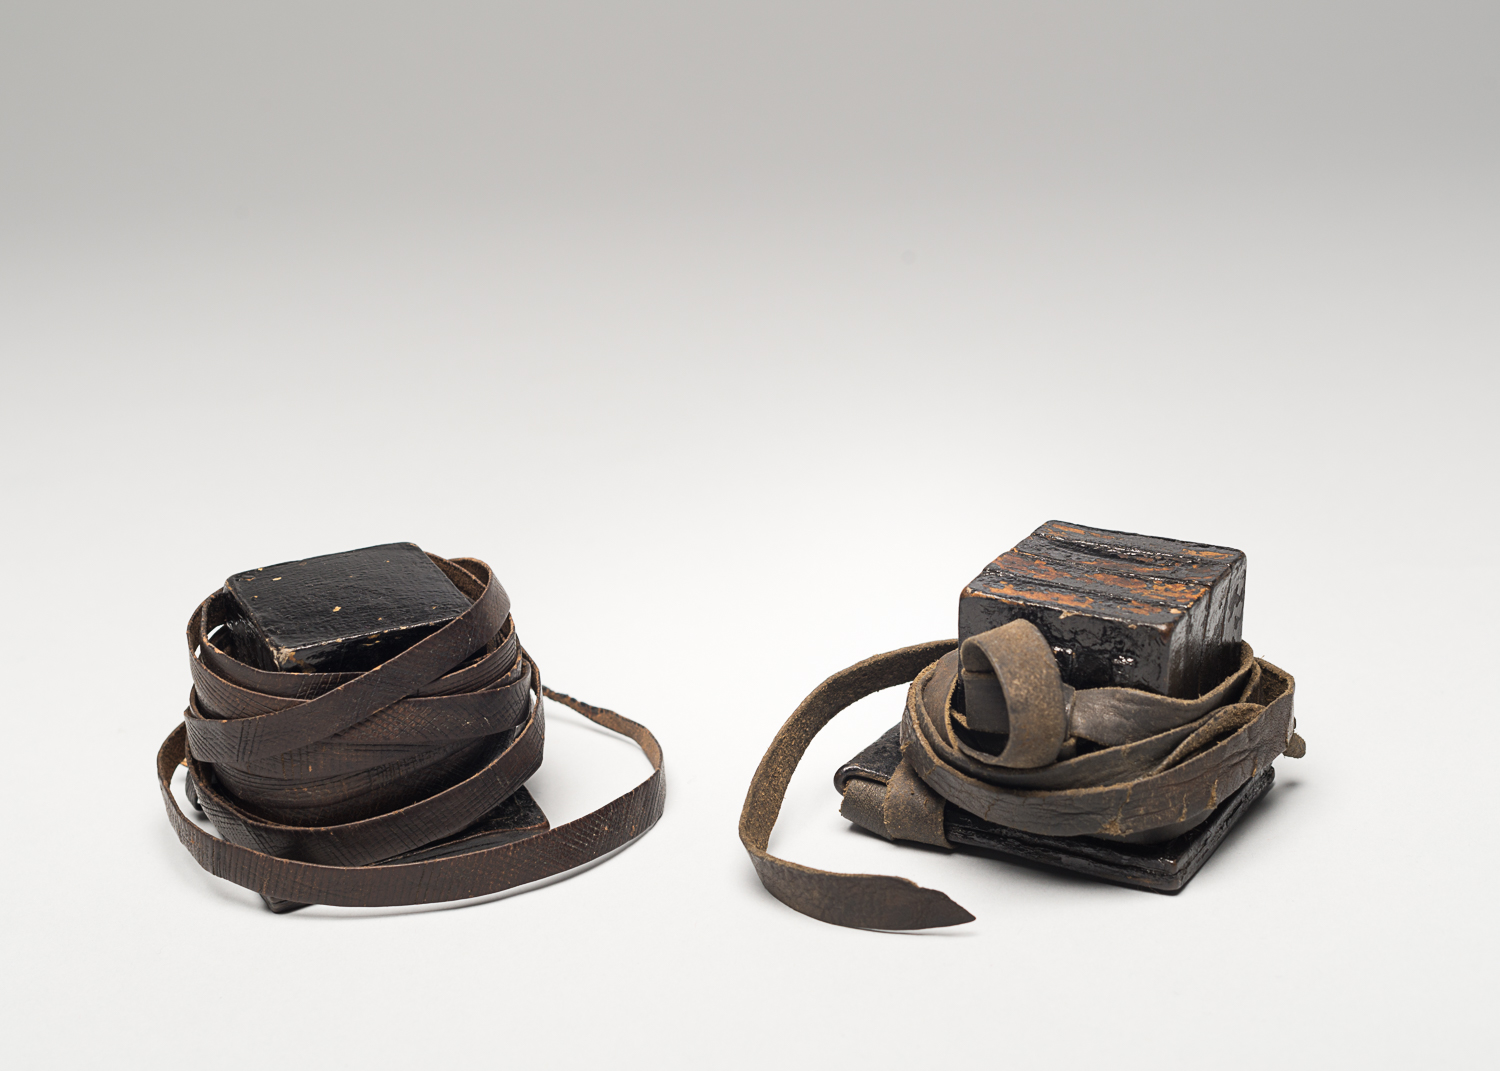 Tefillin are religious objects composed of two black cubic boxes with leather straps. (Photo: Peter Berra)